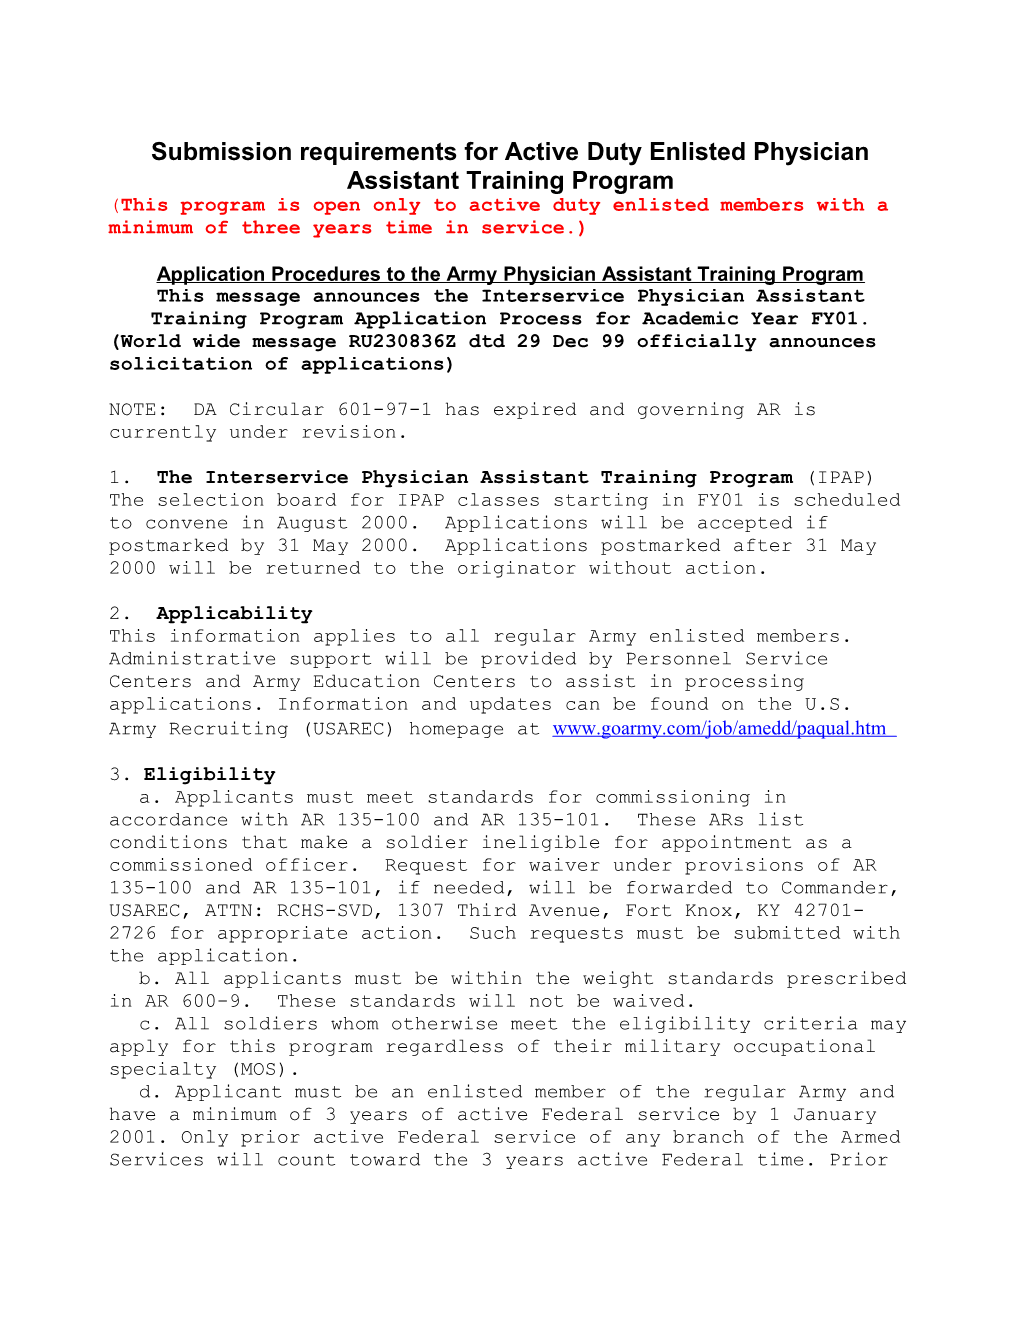 The Interservice Physician Assistant Training Program Overview and Application Process